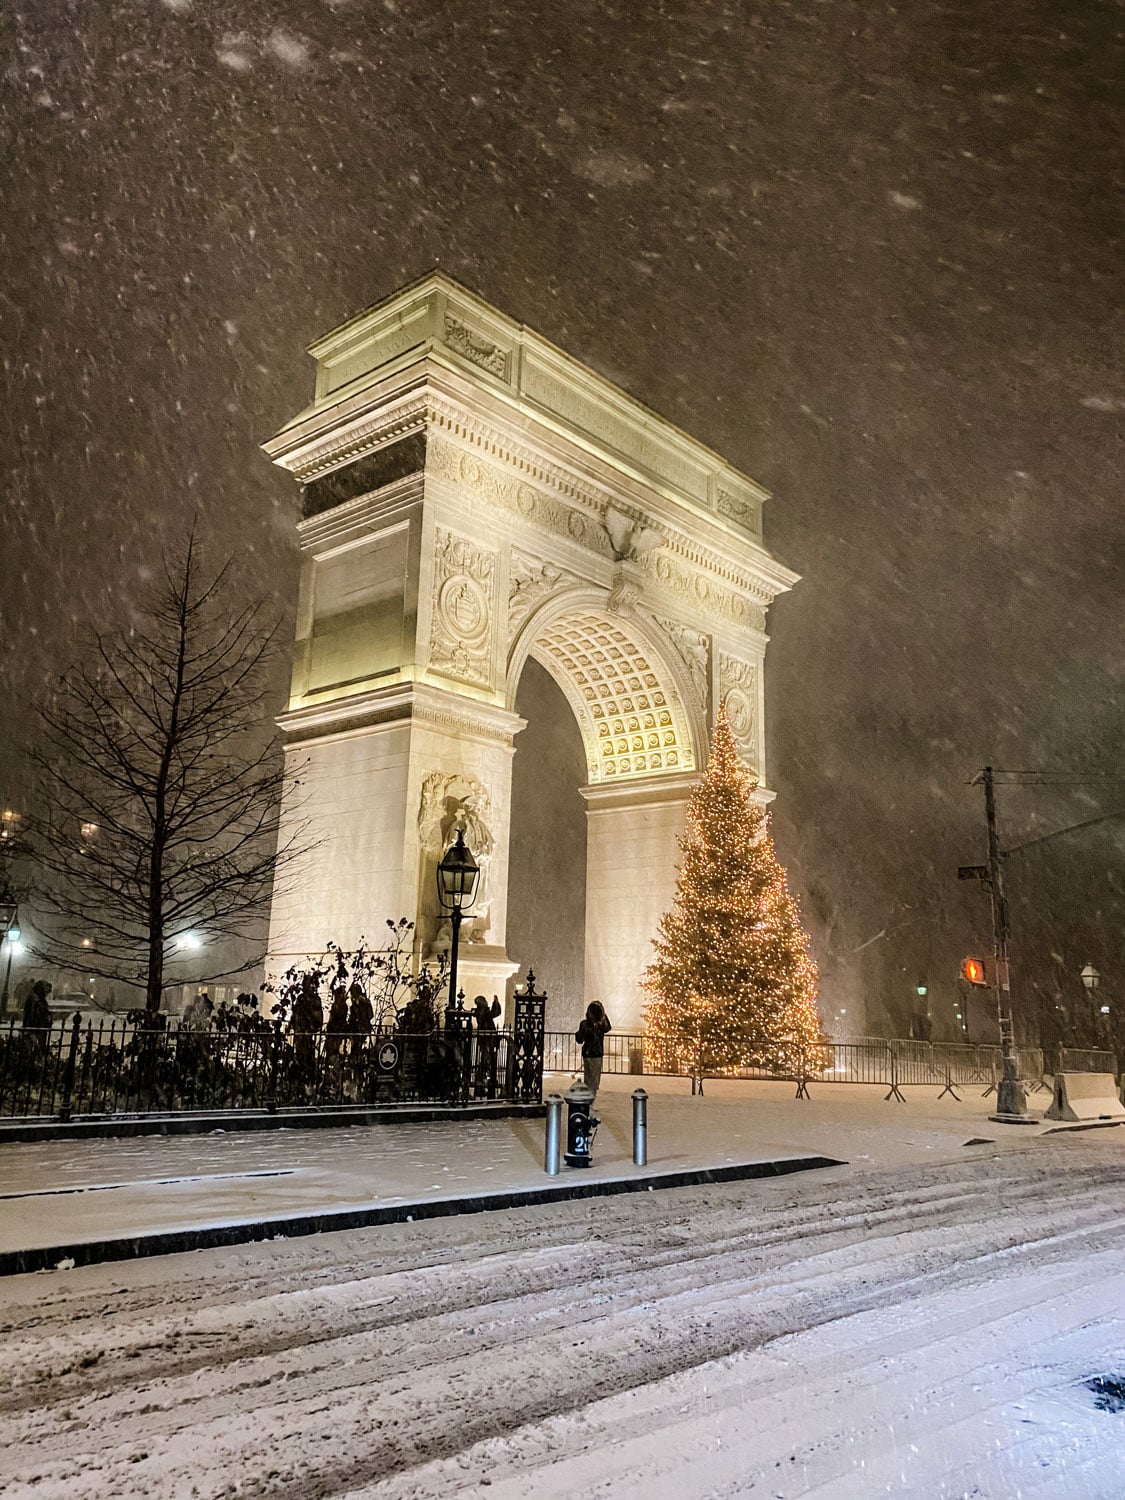 Lifestyle Blogger Annie Diamond was in the city for the first big snow storm in NYC in 5 years